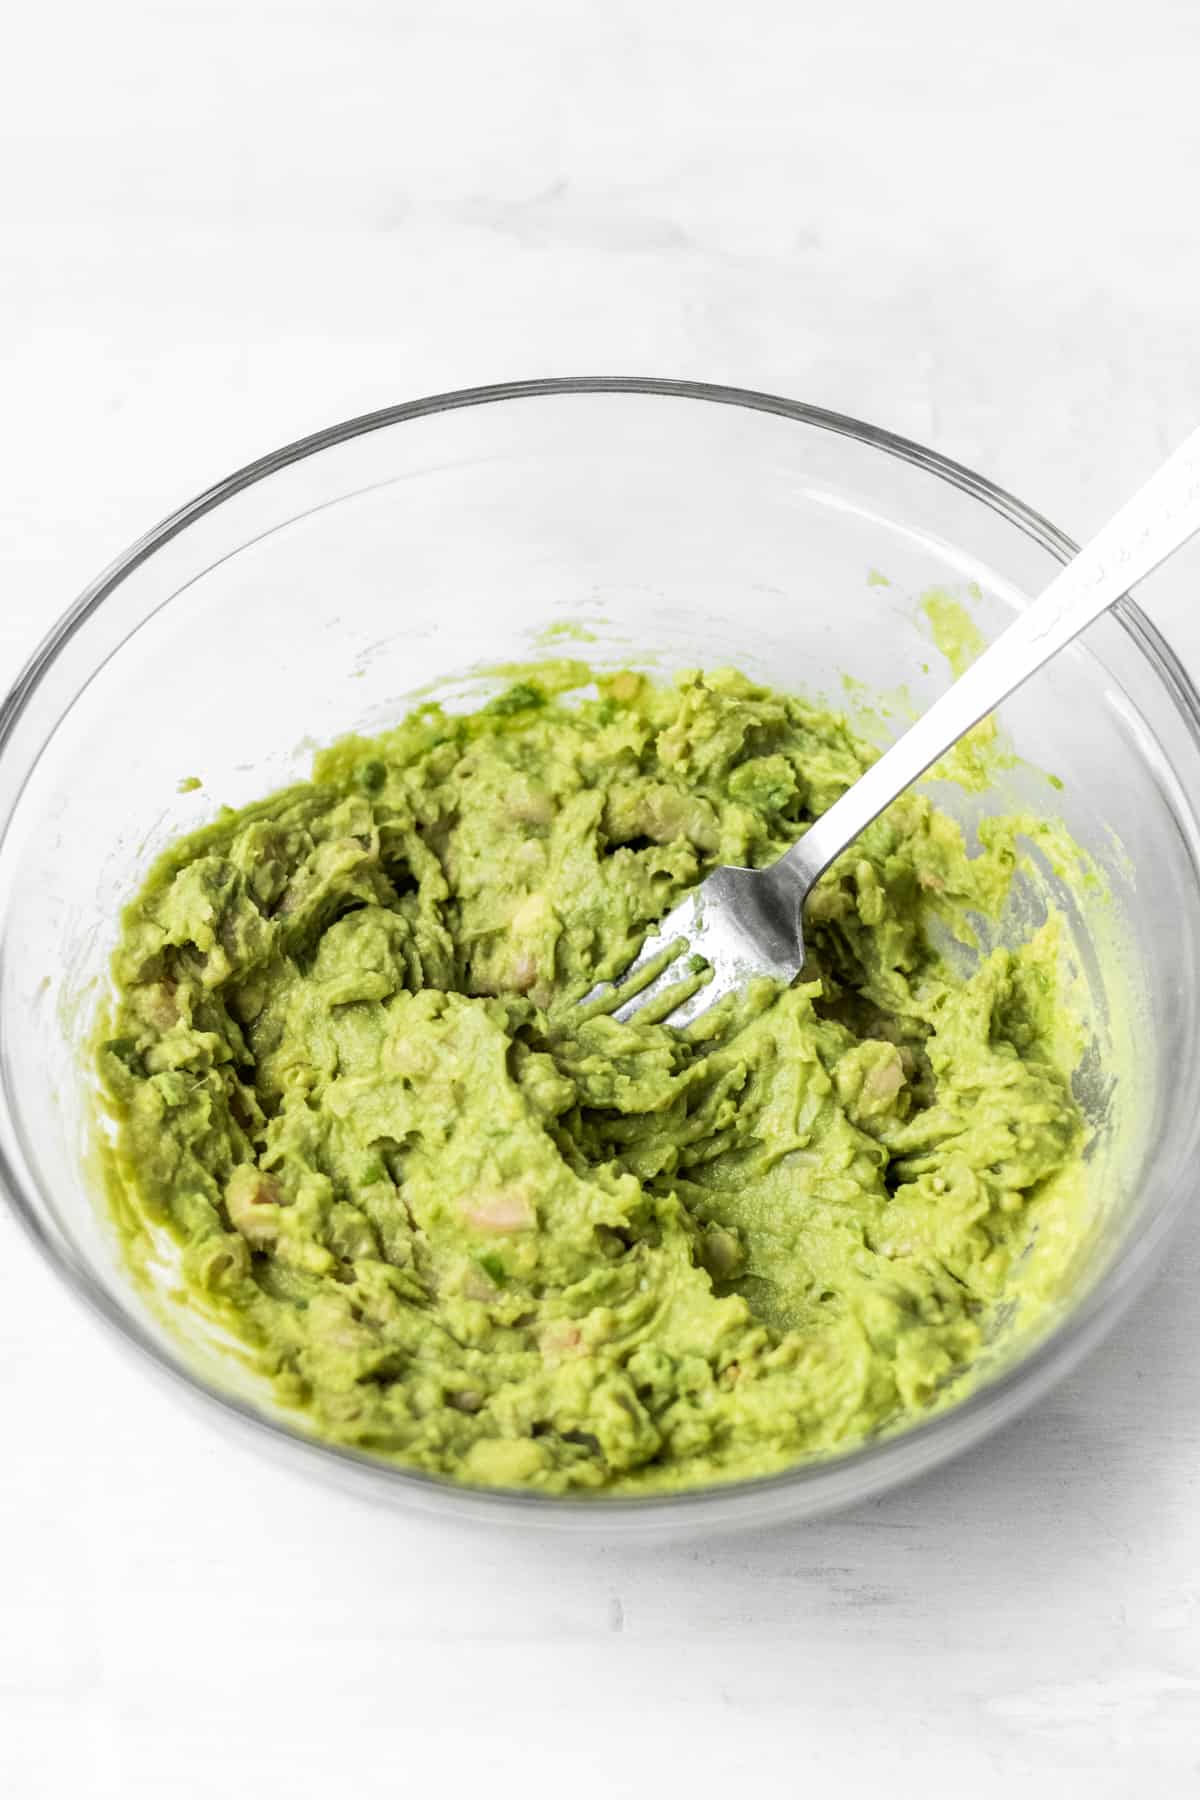 Mashing avocado and white beans in a glass bowl.